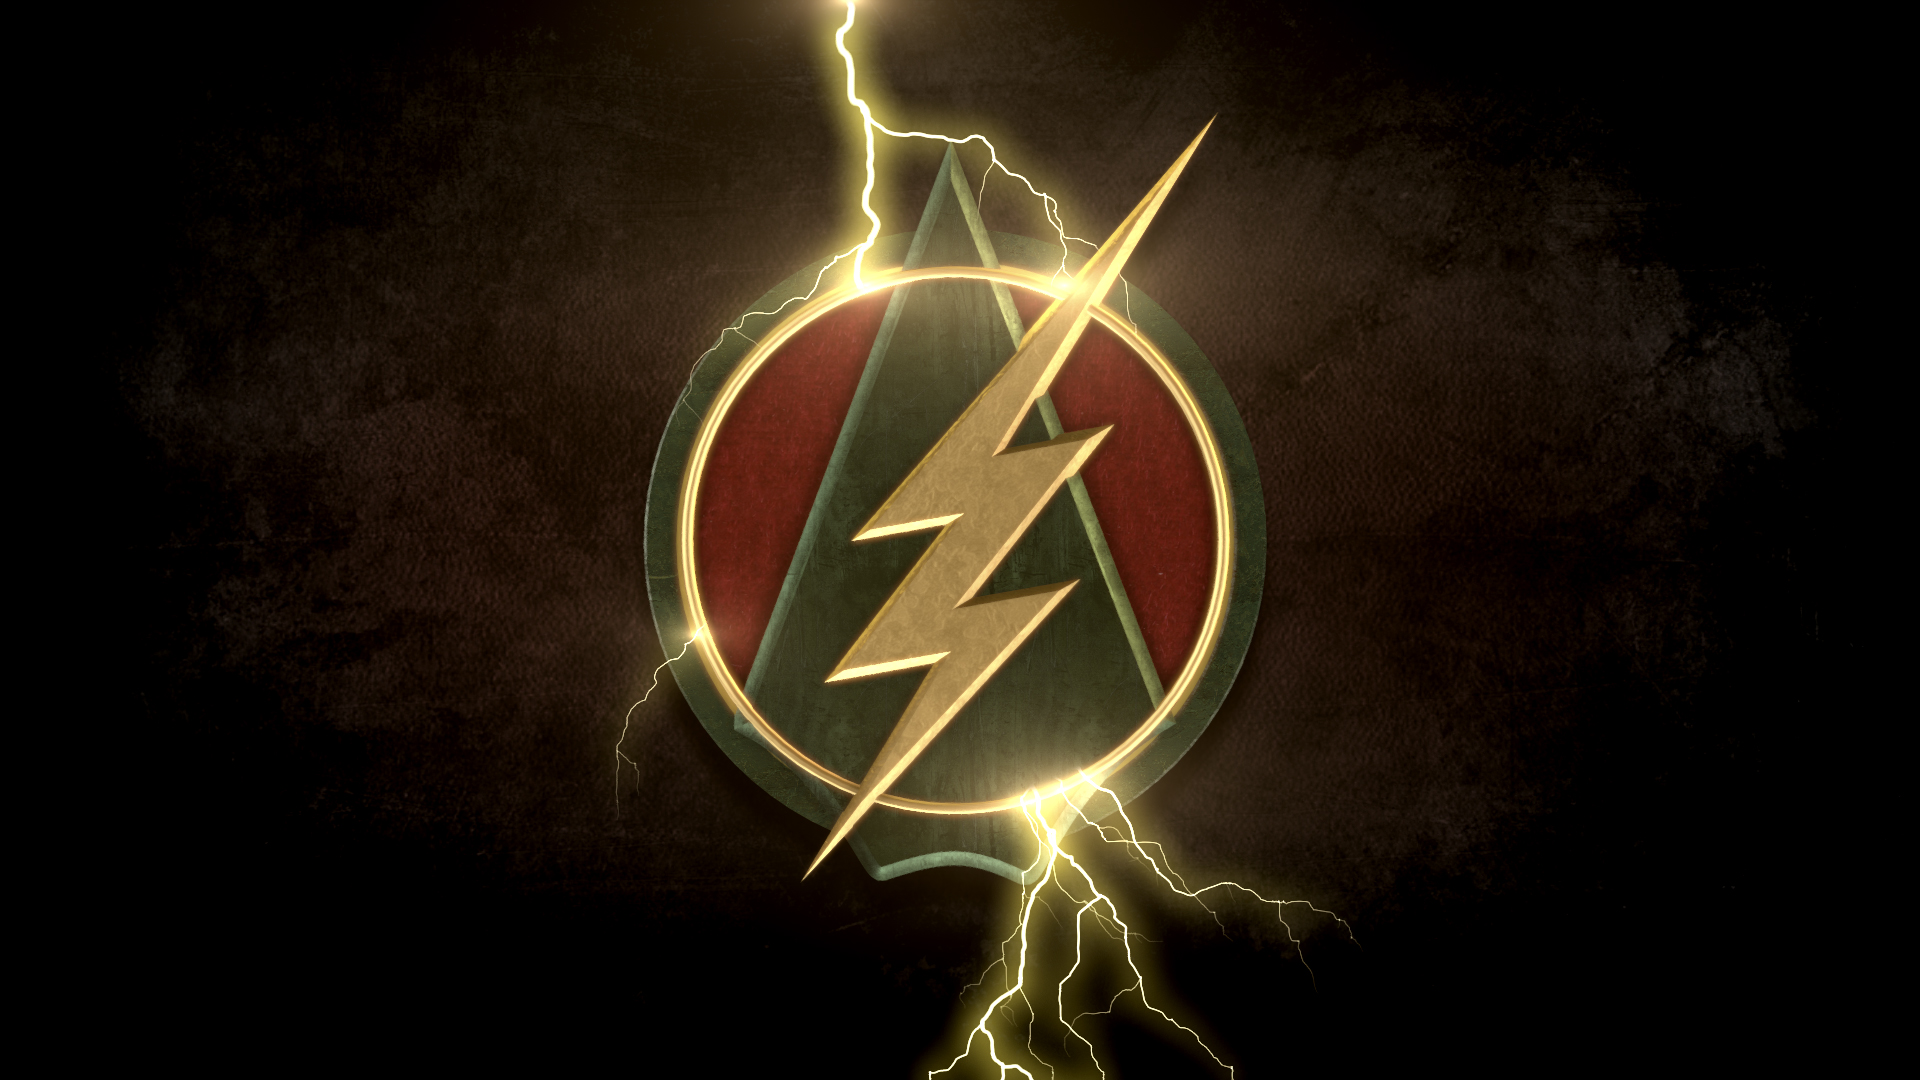 the flash live wallpaper,darkness,graphic design,font,logo,graphics